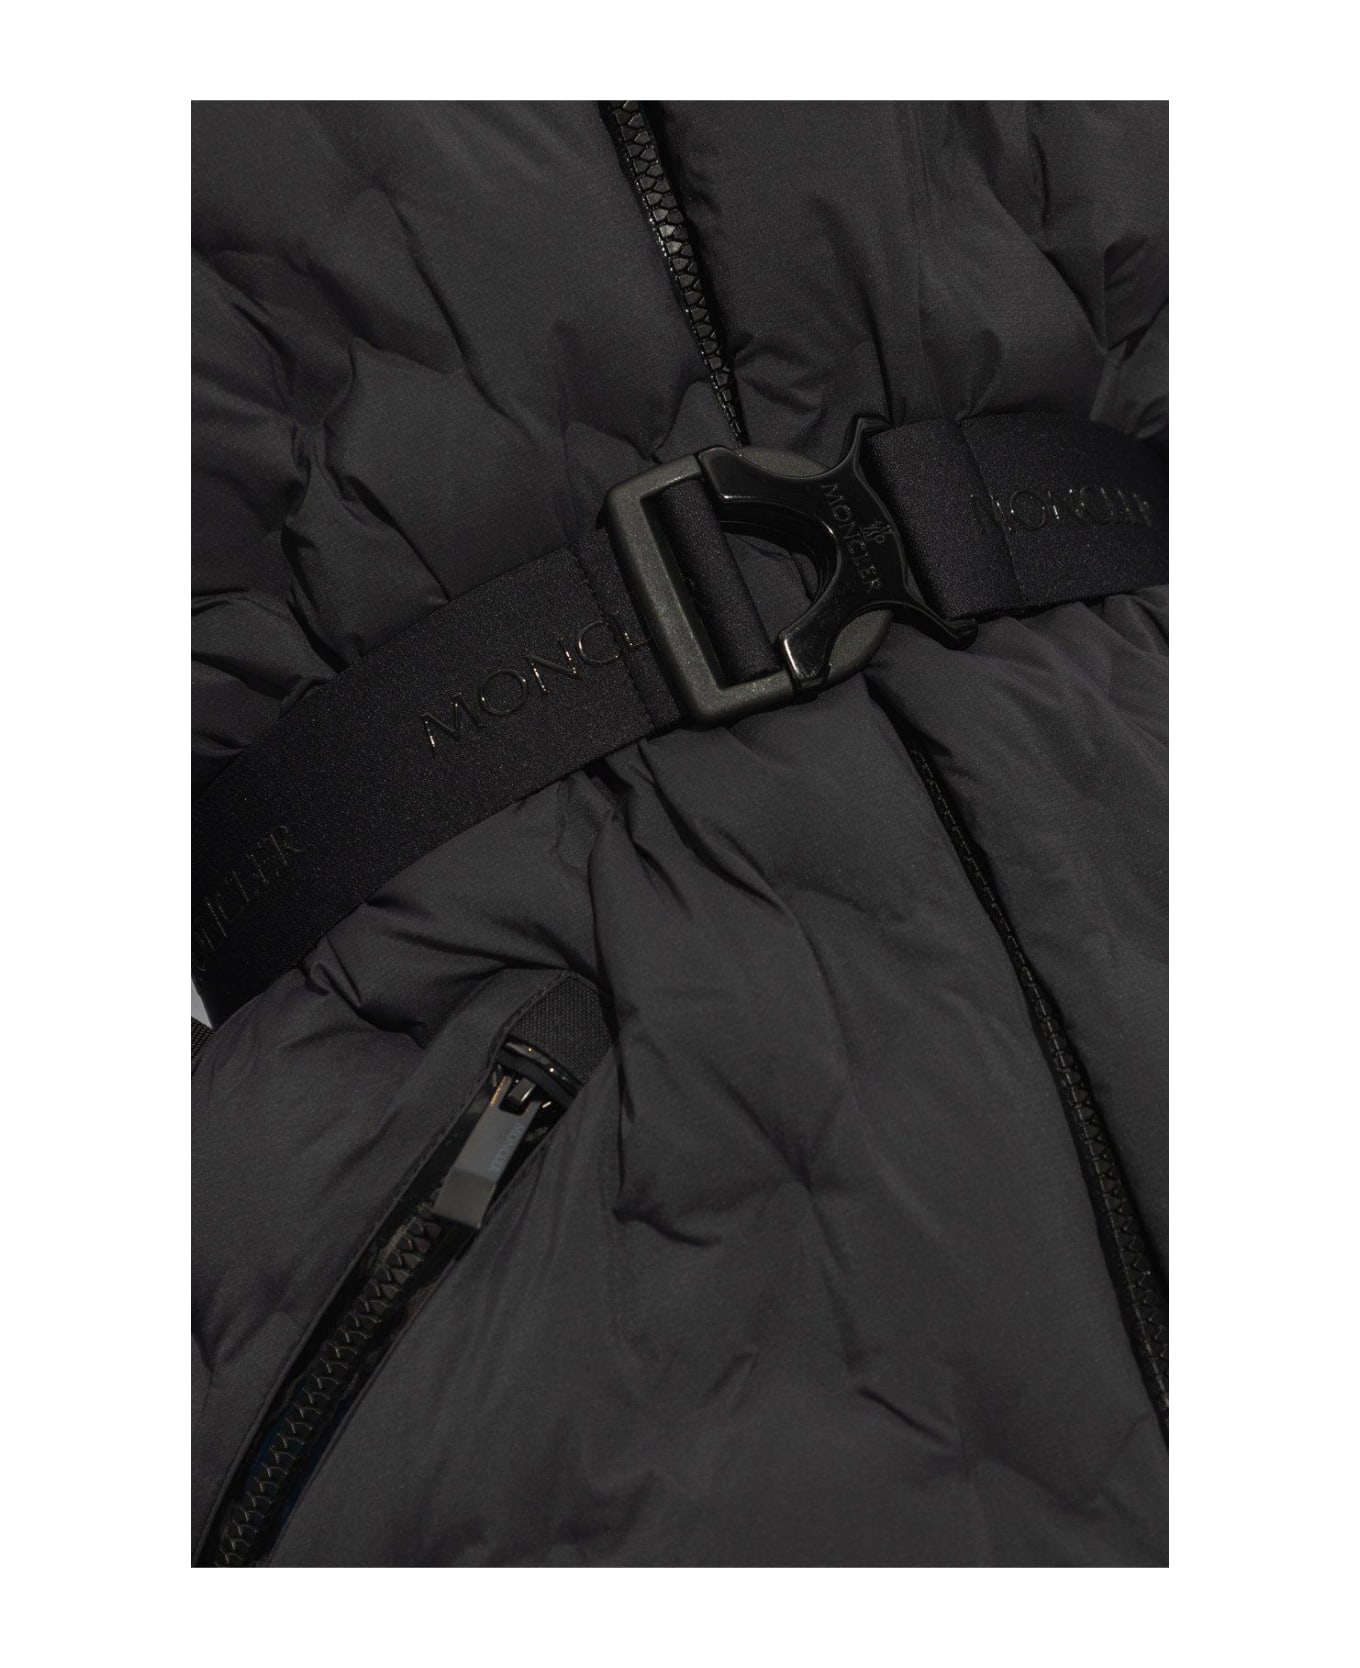 Moncler Adonis Quilted Jacket - Black ダウンジャケット